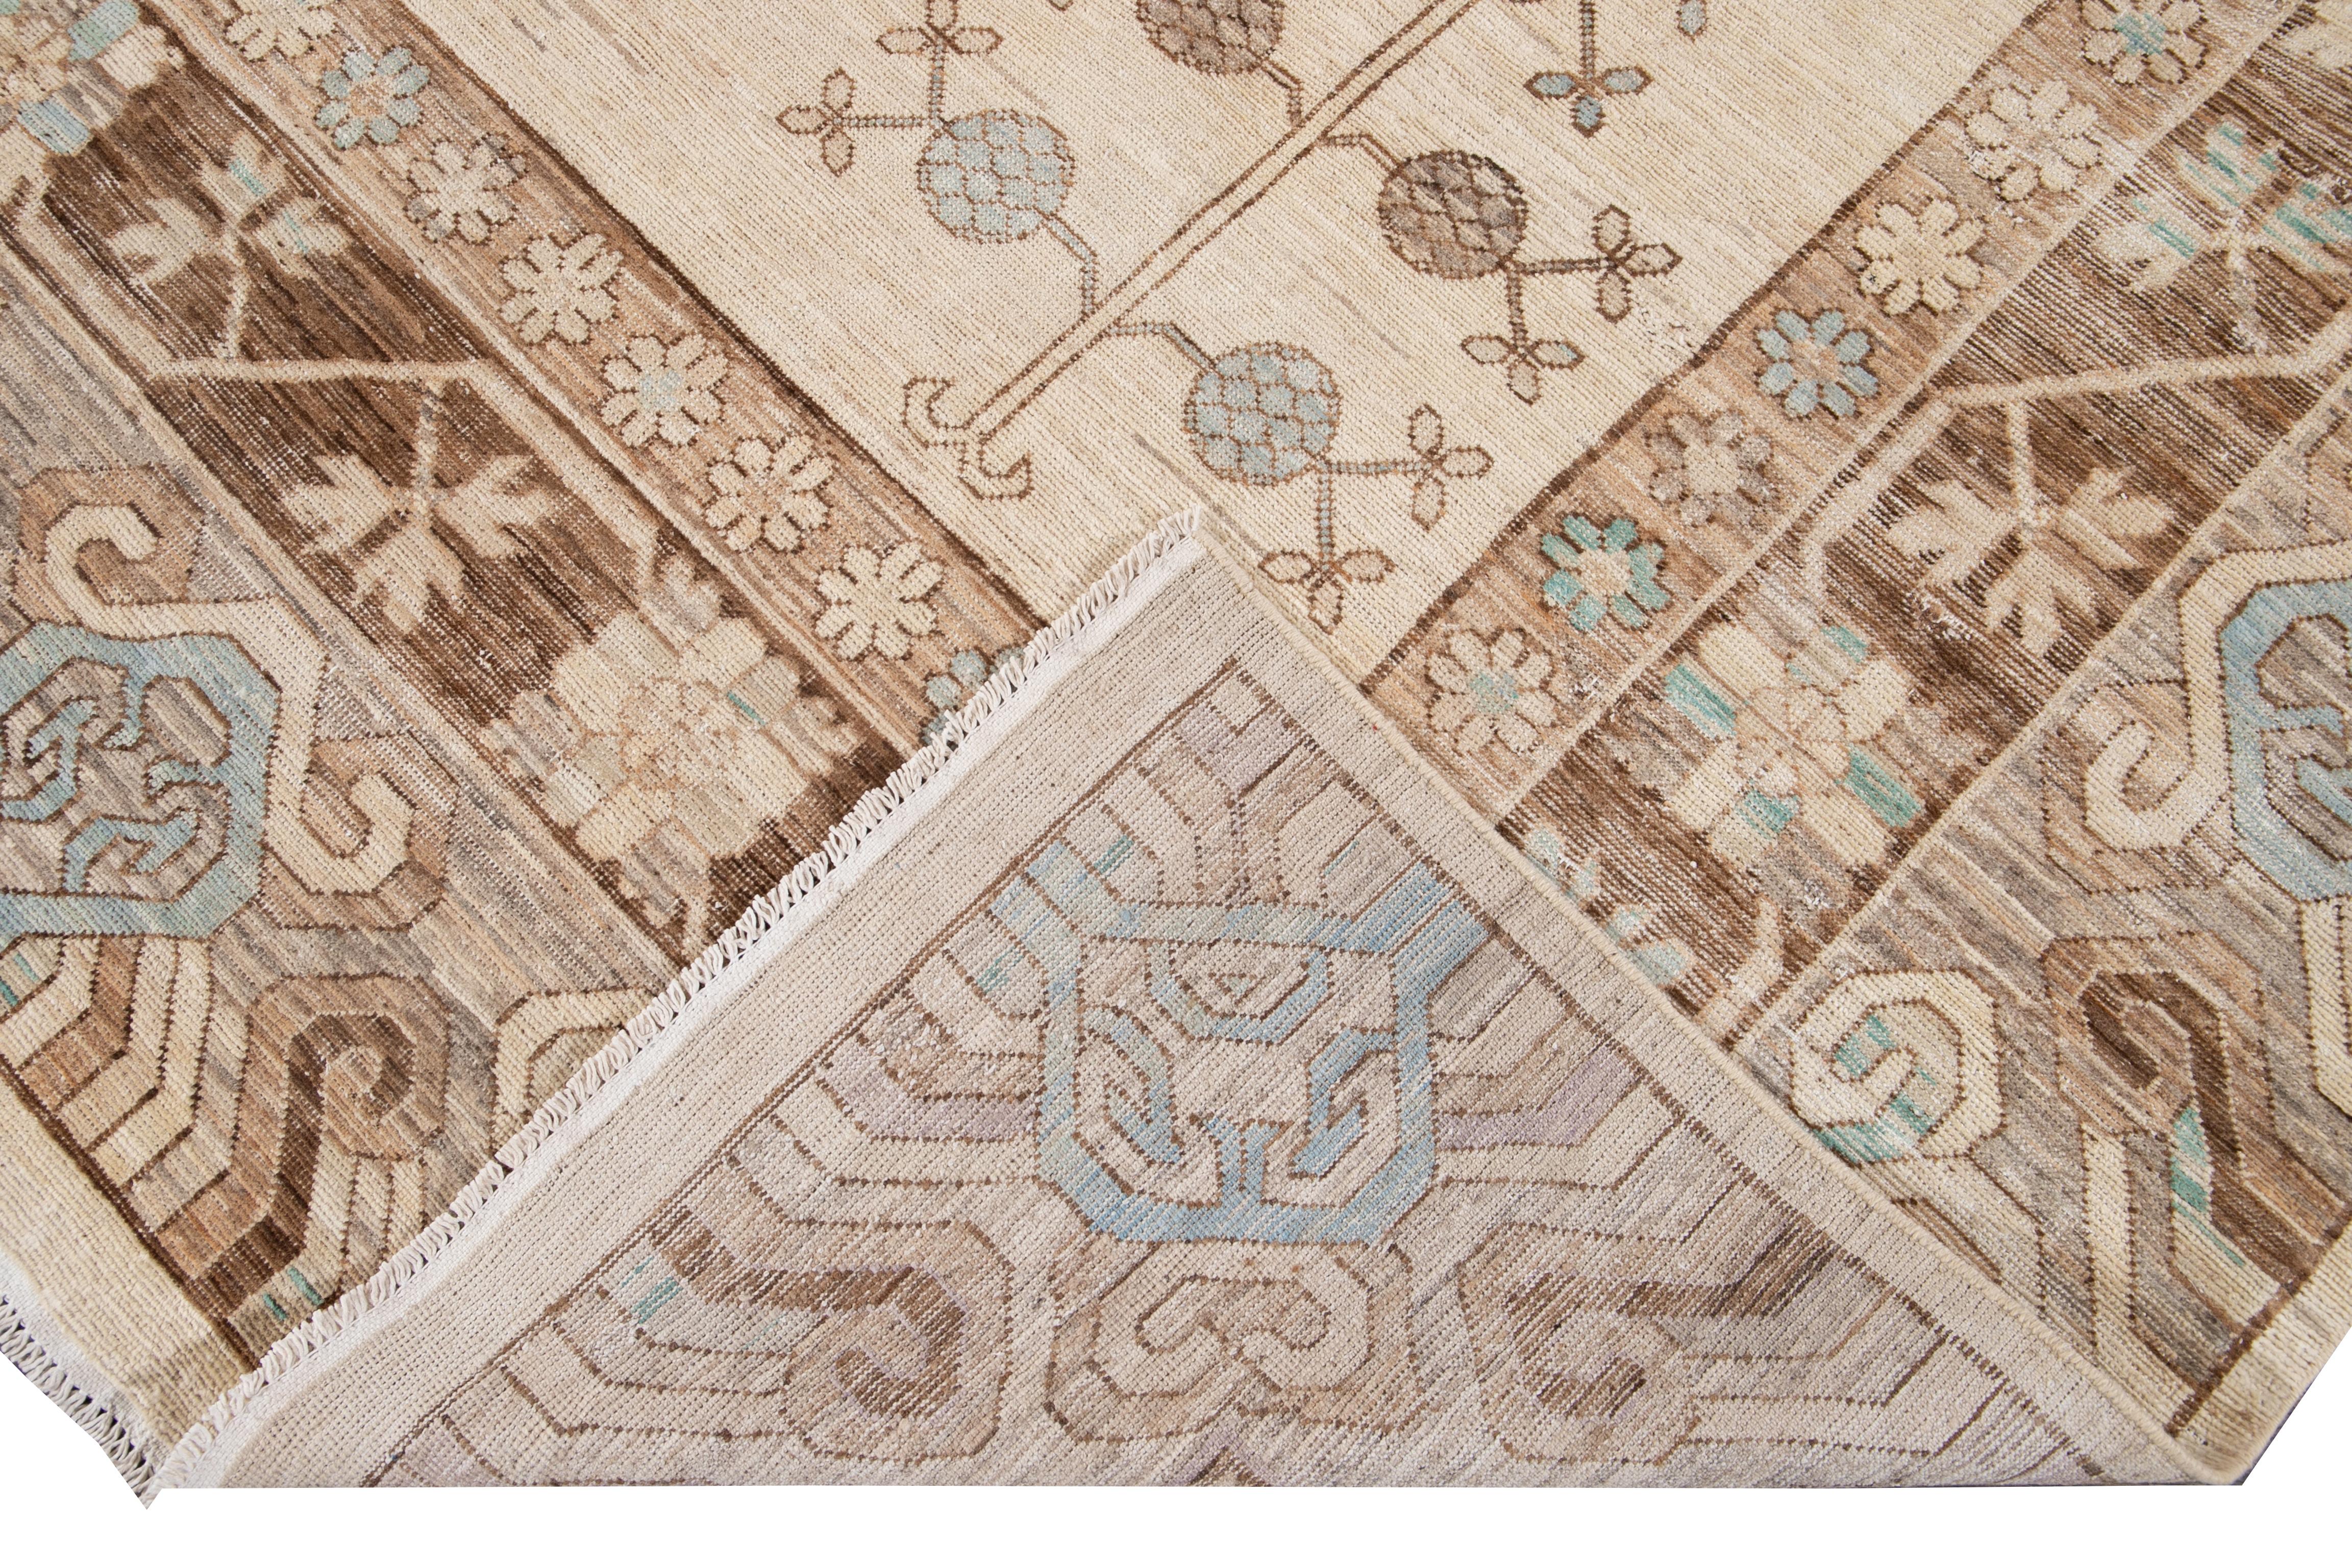 Beautiful modern Khotan style hand knotted wool rug beige field. This Khotan-style rug has a beautifully designed frame and accent of teal, beige, and brown in a gorgeous all-over geometric medallion floral design.

This rug measures 9'10